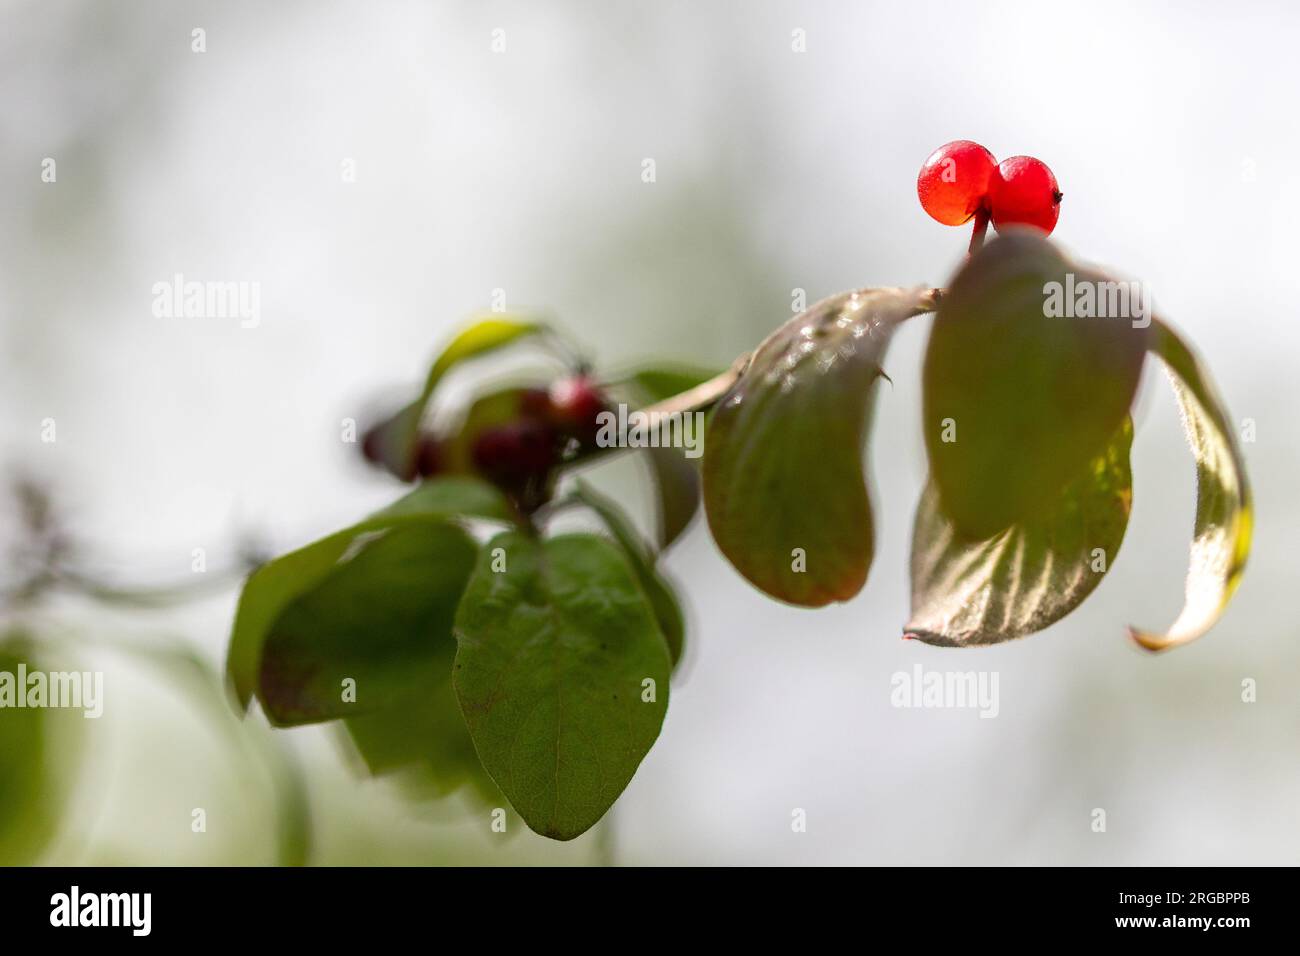 Close-up view at ripe red berries of the European fly honeysuckle (Lonicera xylosteum) with some green leaves Stock Photo